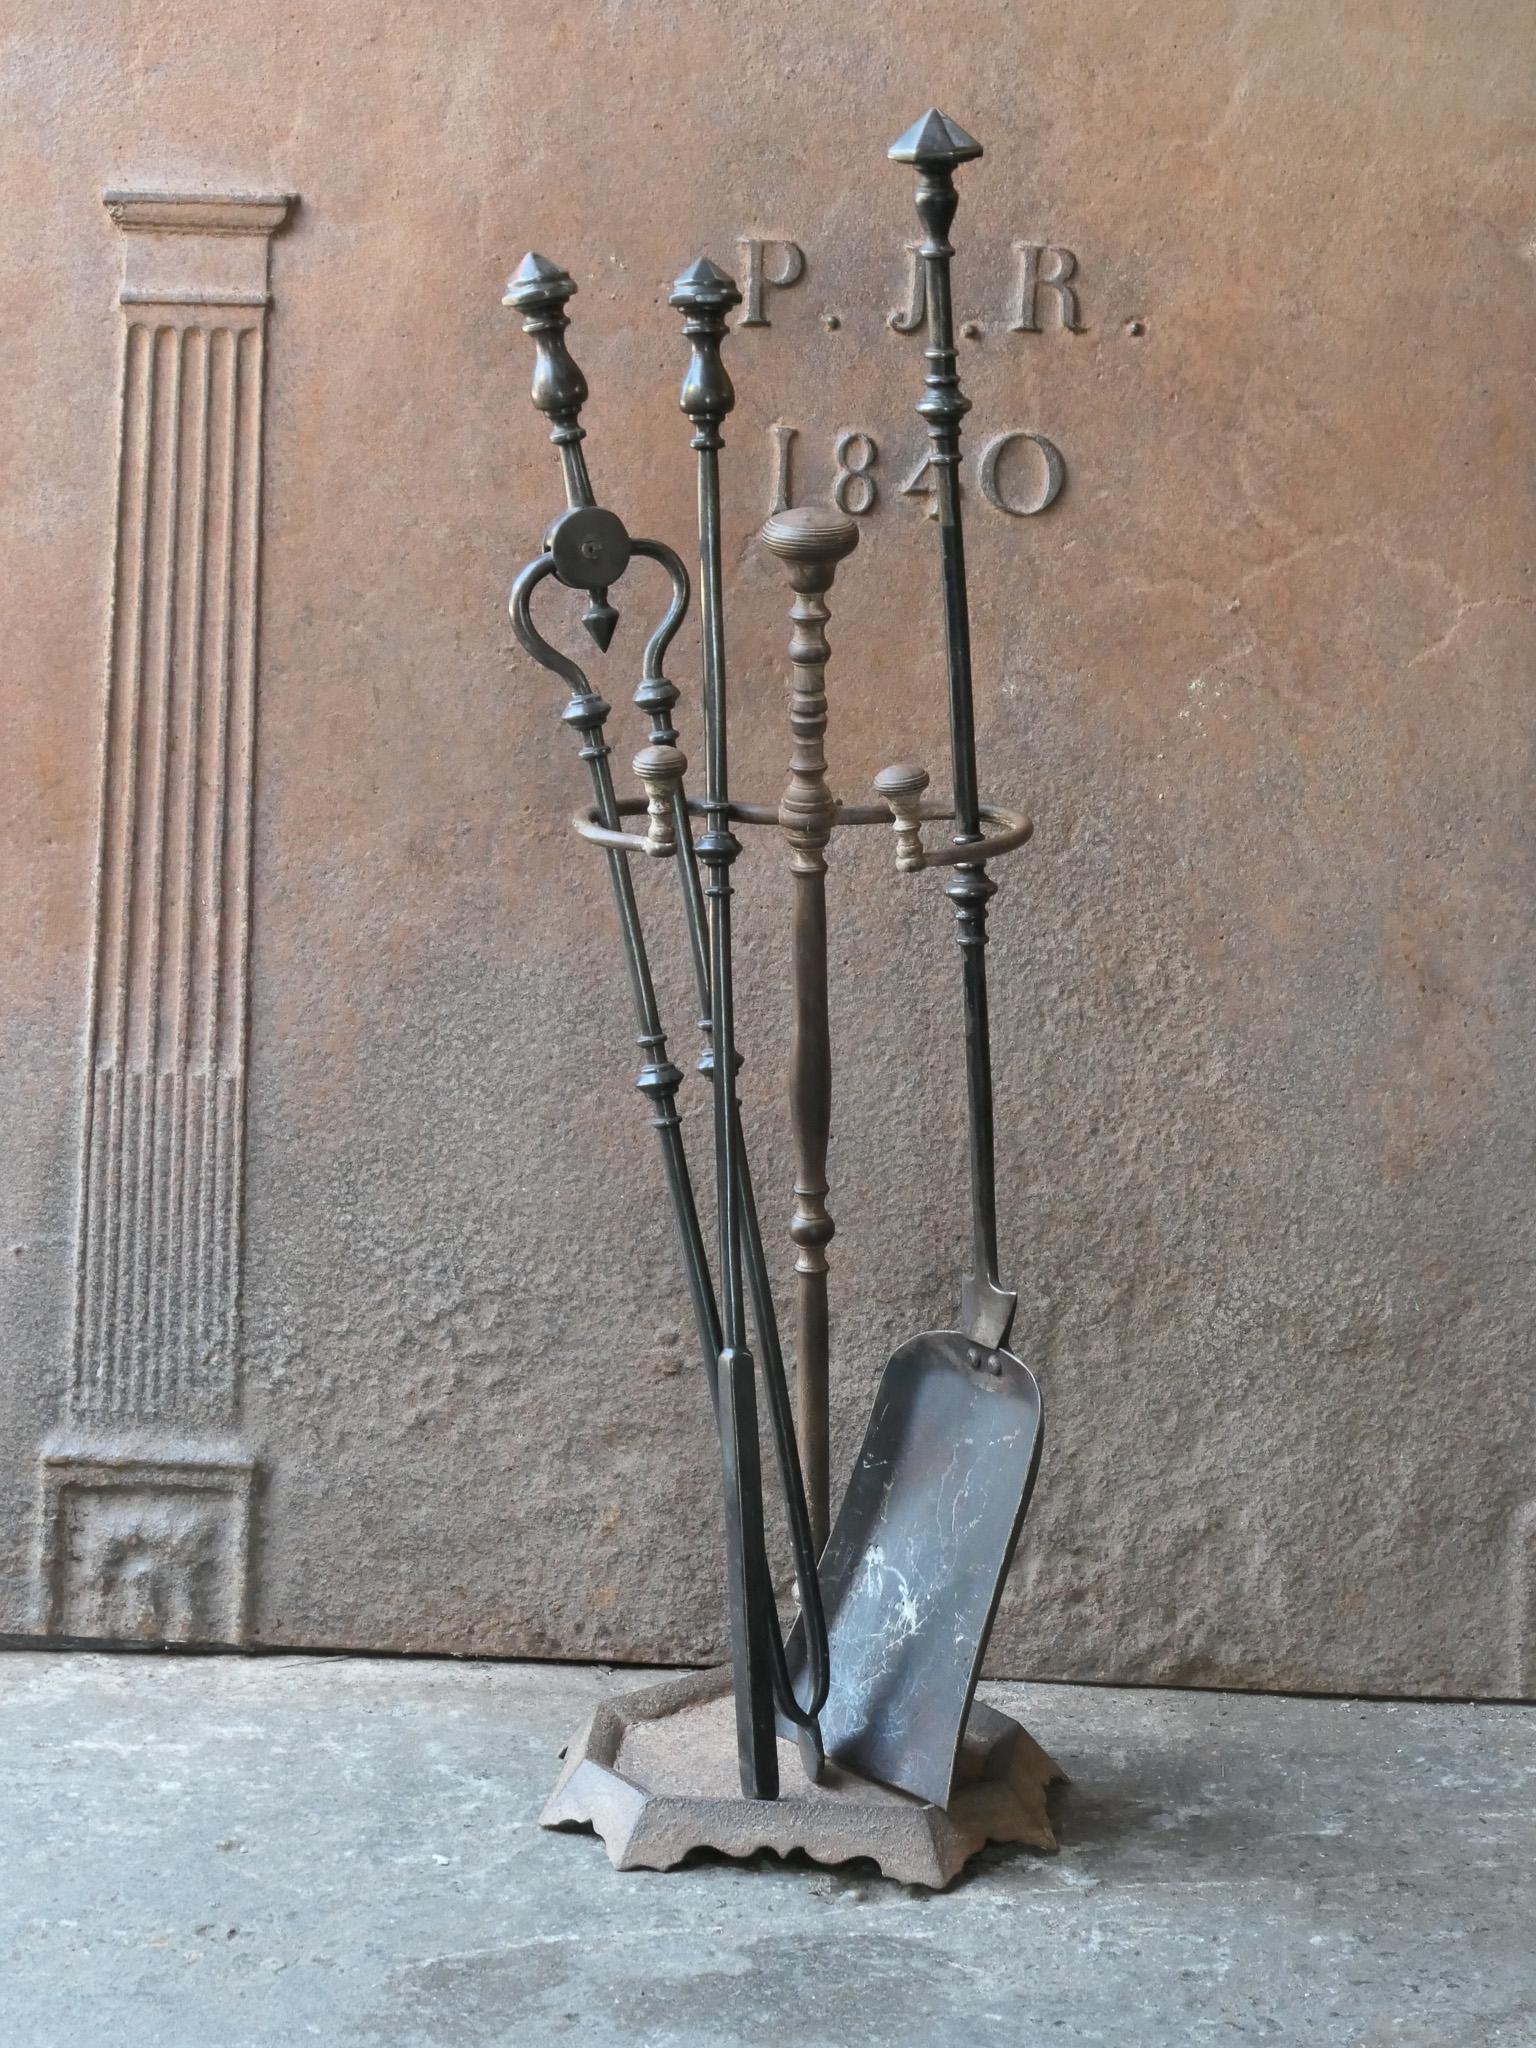 19th century English Victorian period fireplace toolset. The tools are made of wrought iron, while the stand is made of cast iron and wrought iron. The toolset consists of tongs, shovel and stand. The condition is good.








.